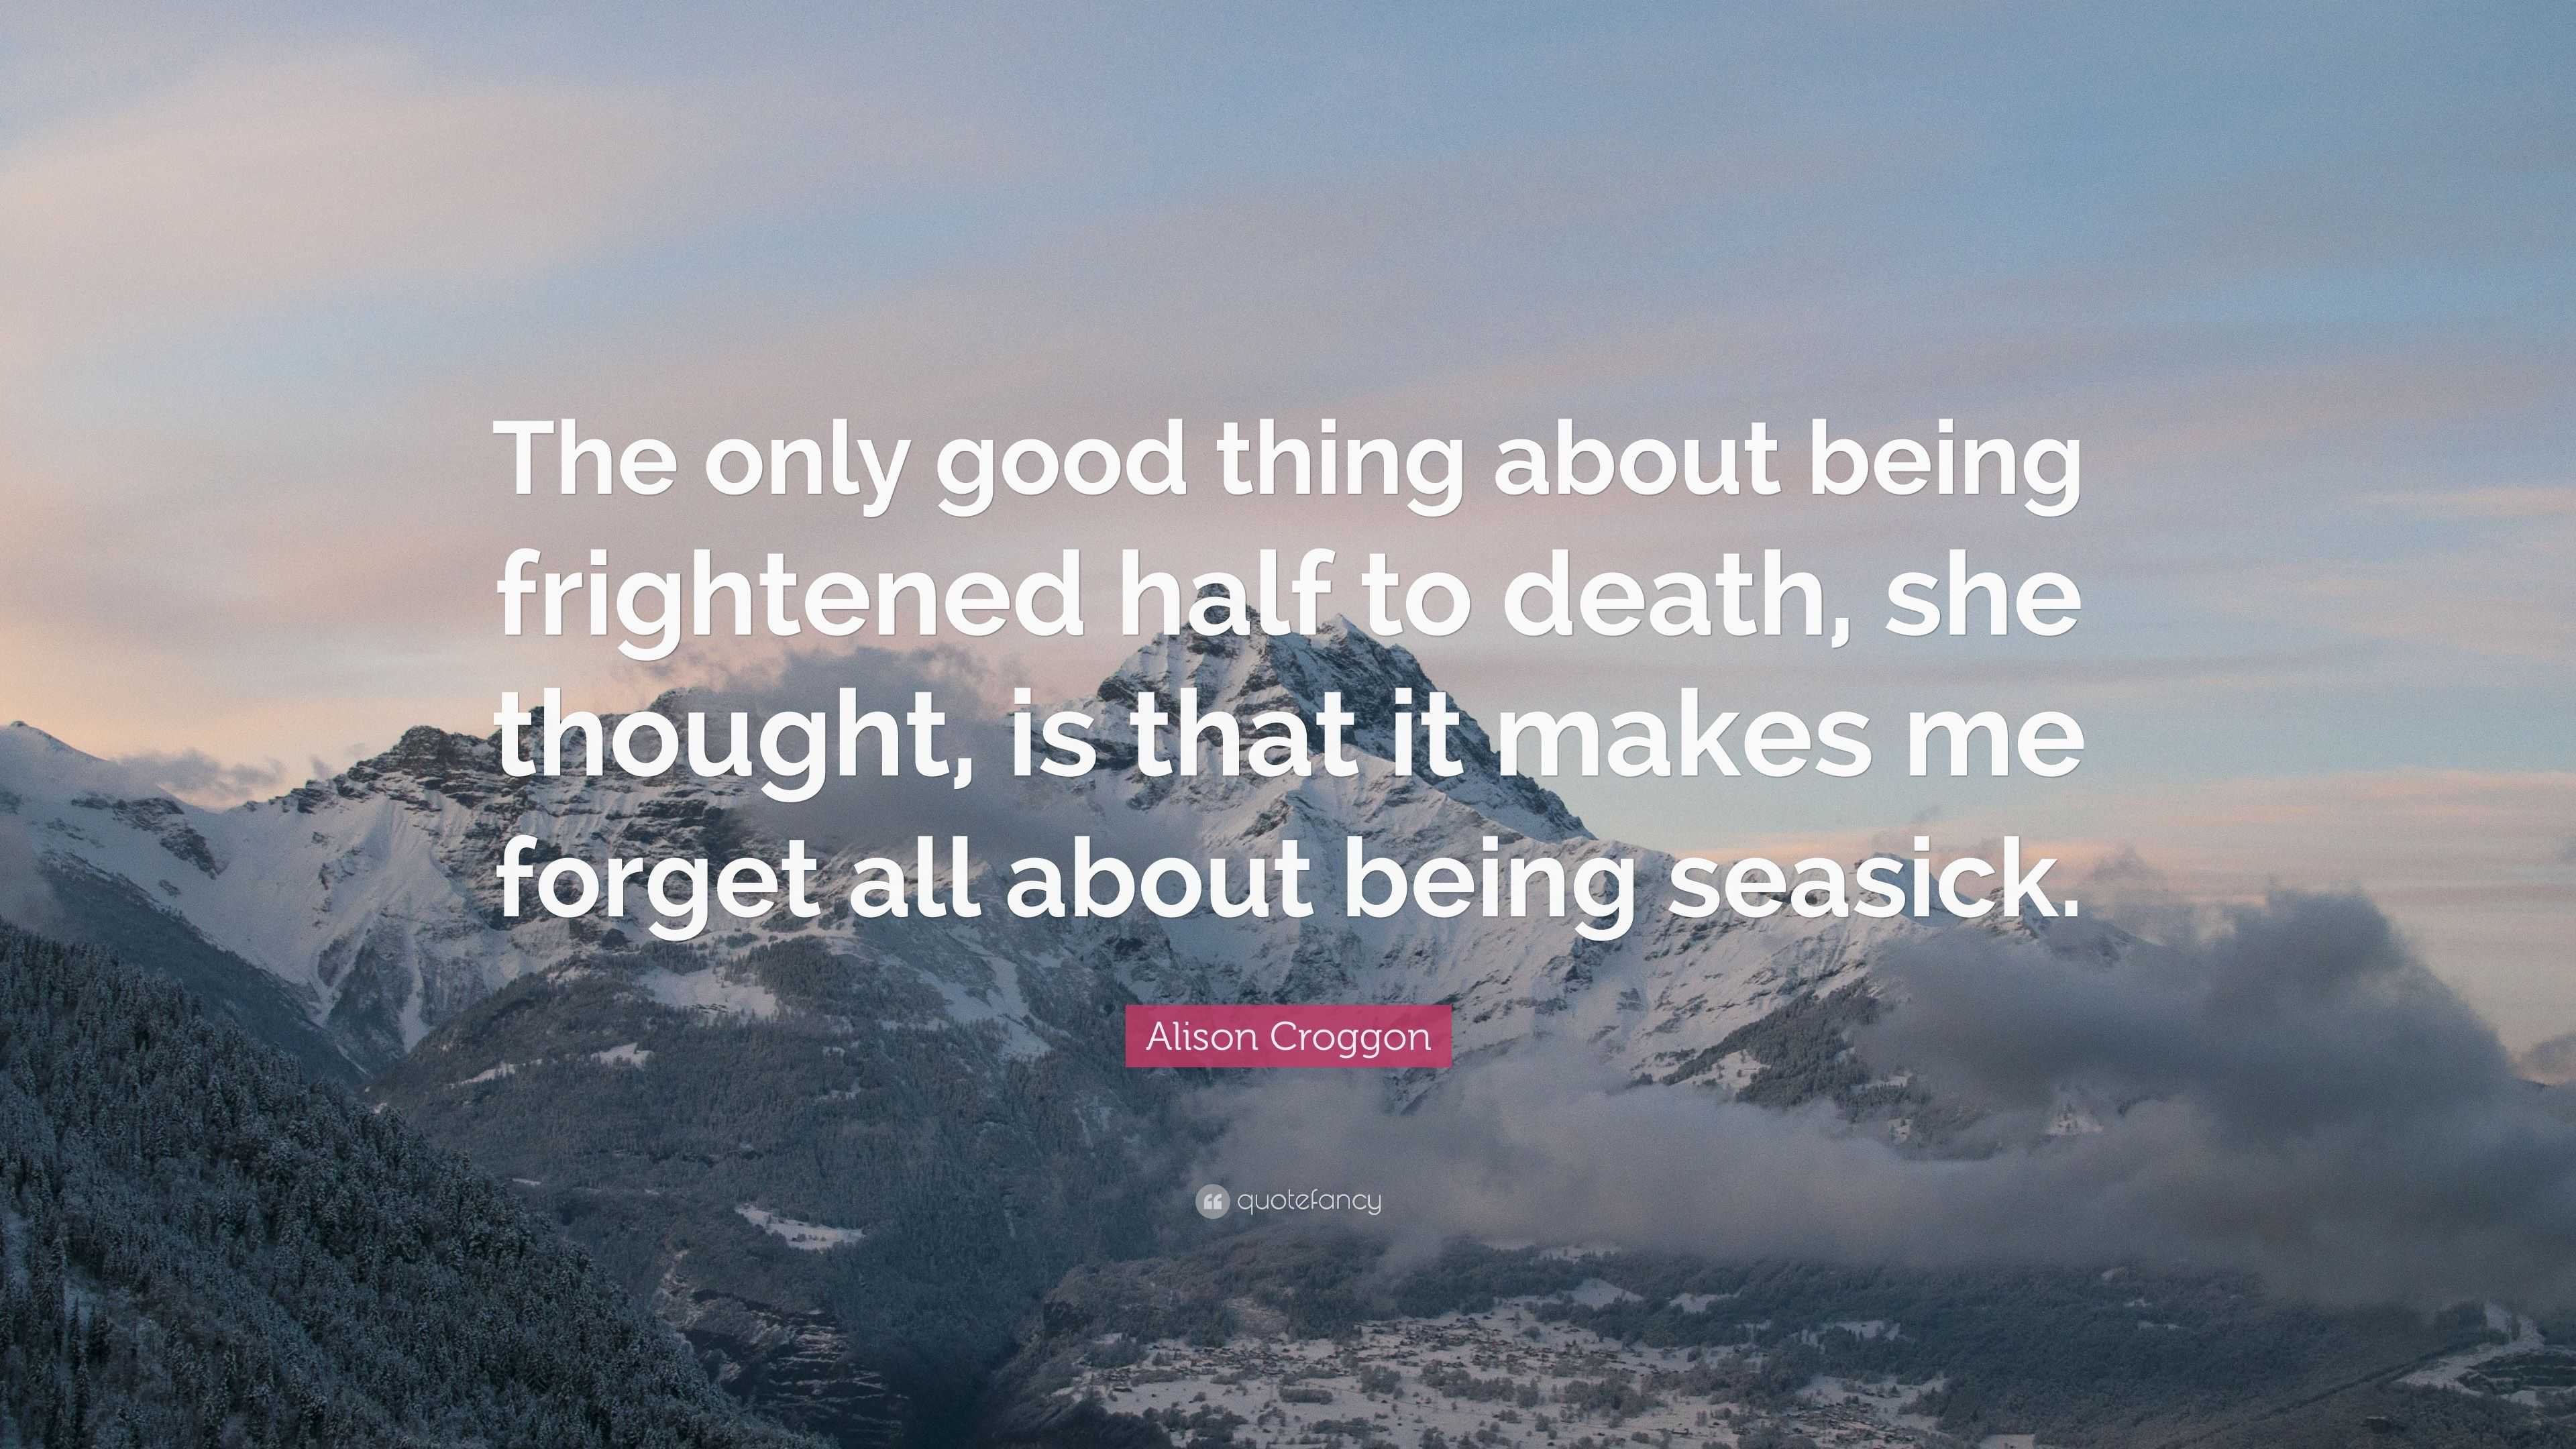 Alison Croggon Quote: “The only good thing about being frightened half ...